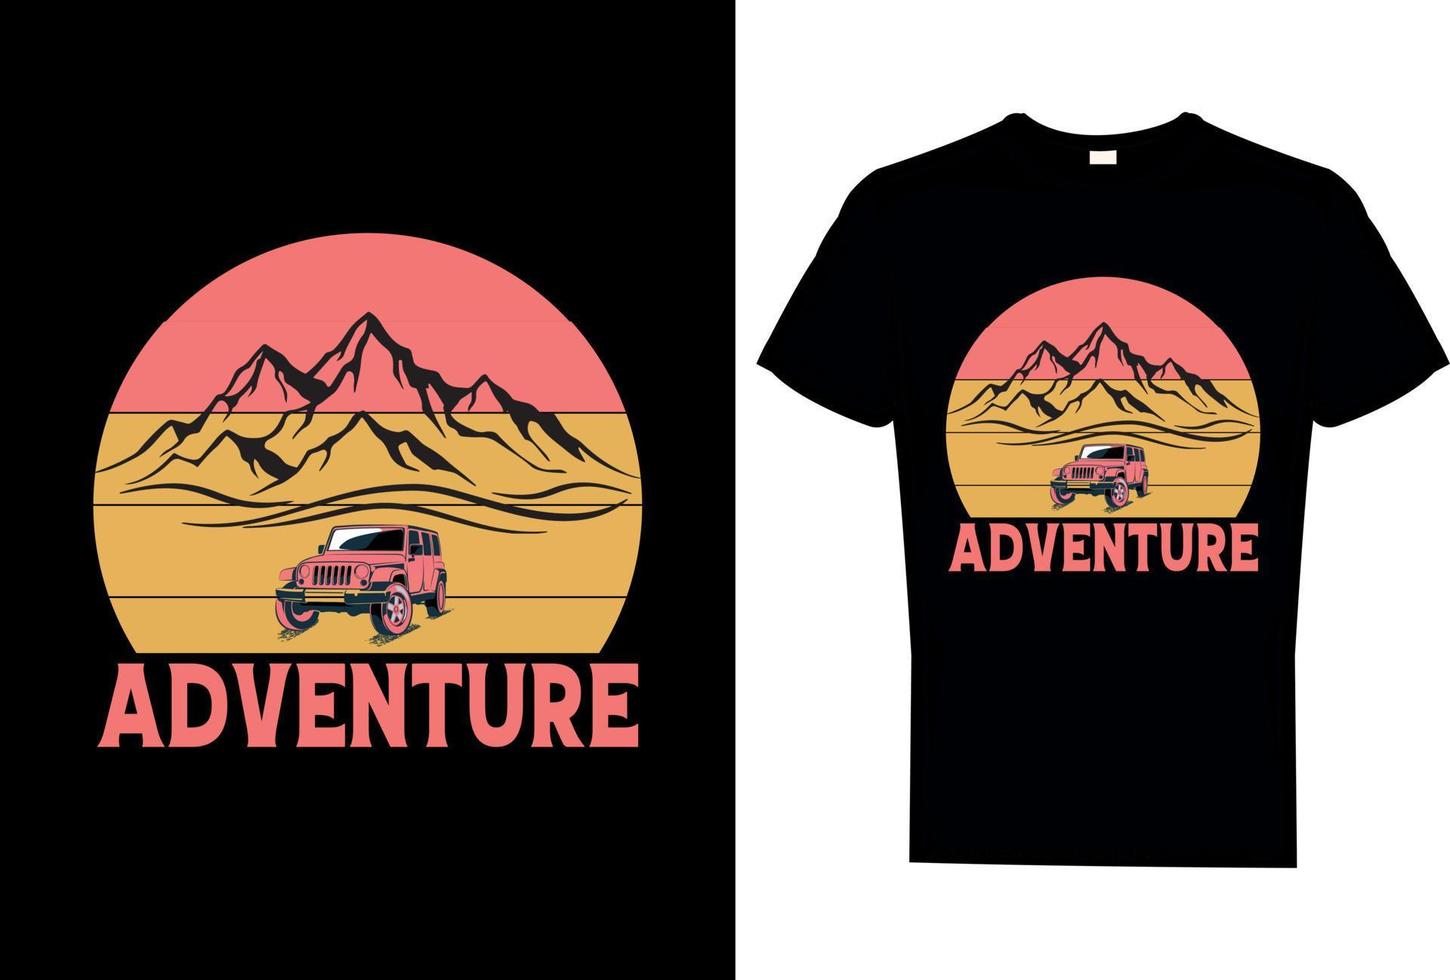 Adventure t-shirt design for vector and mockup